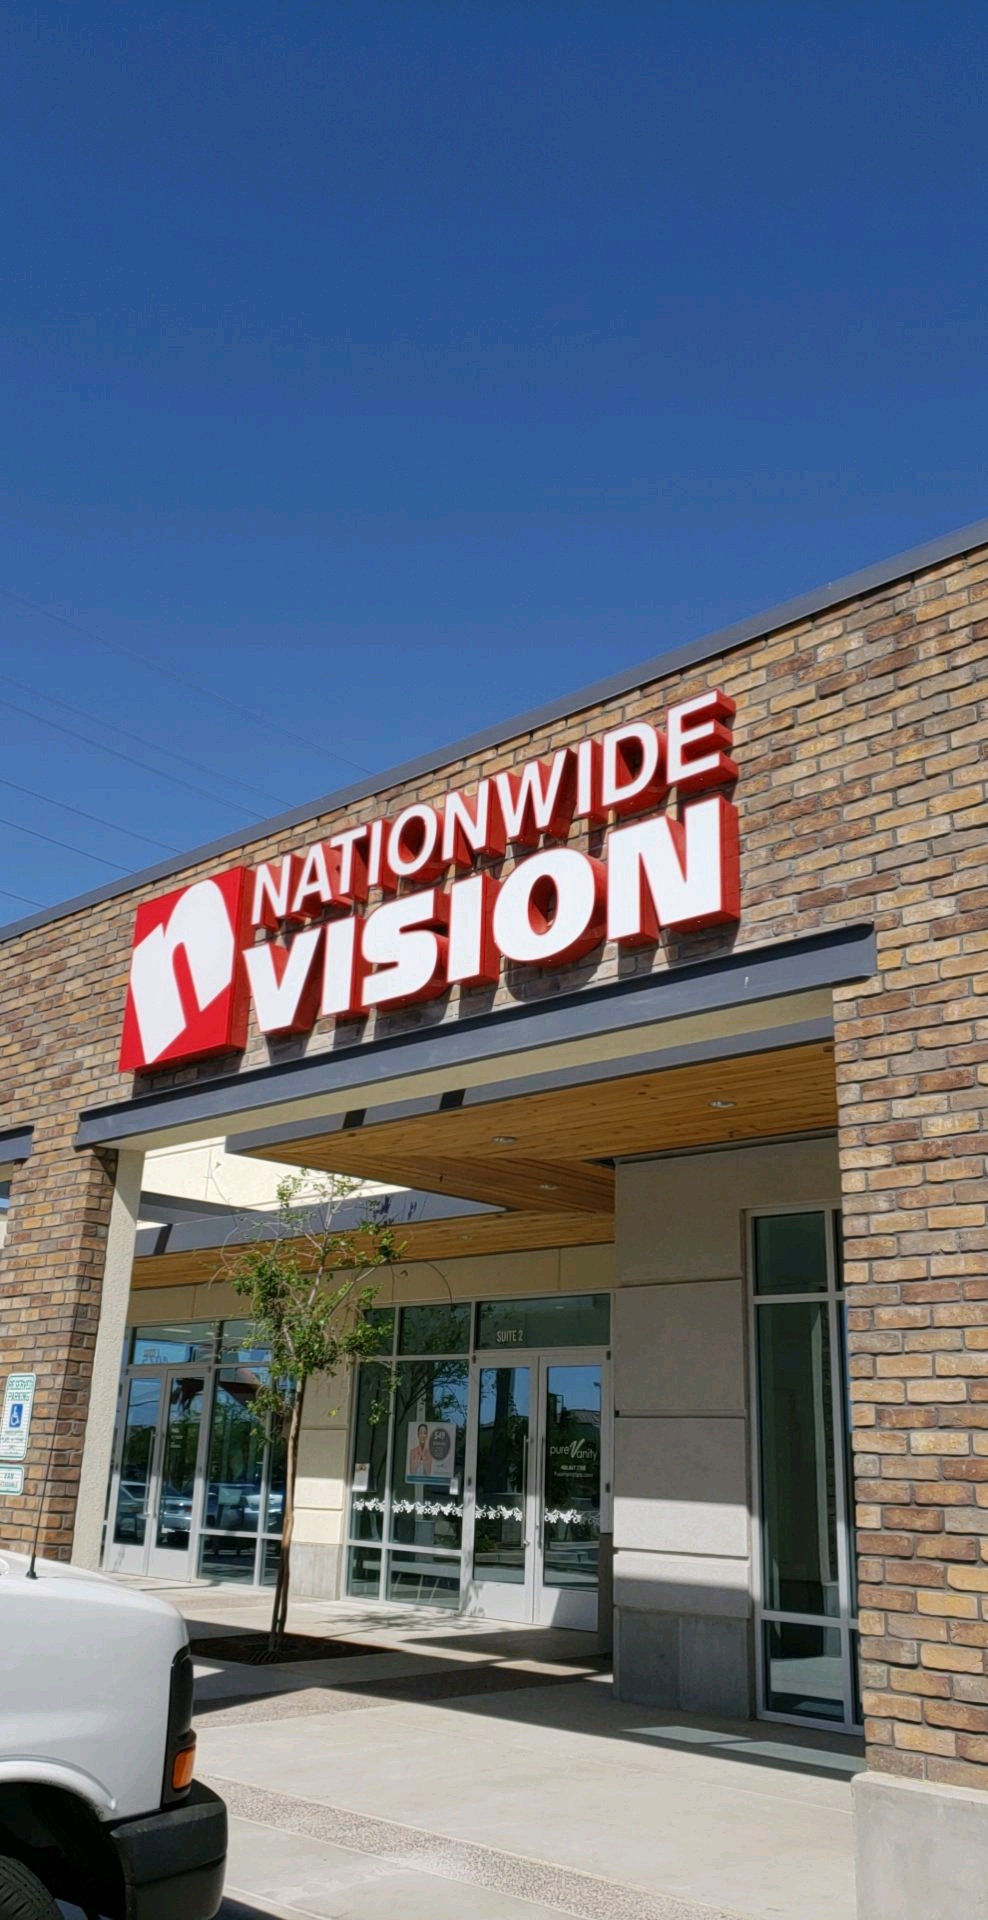 Nationwide Vision